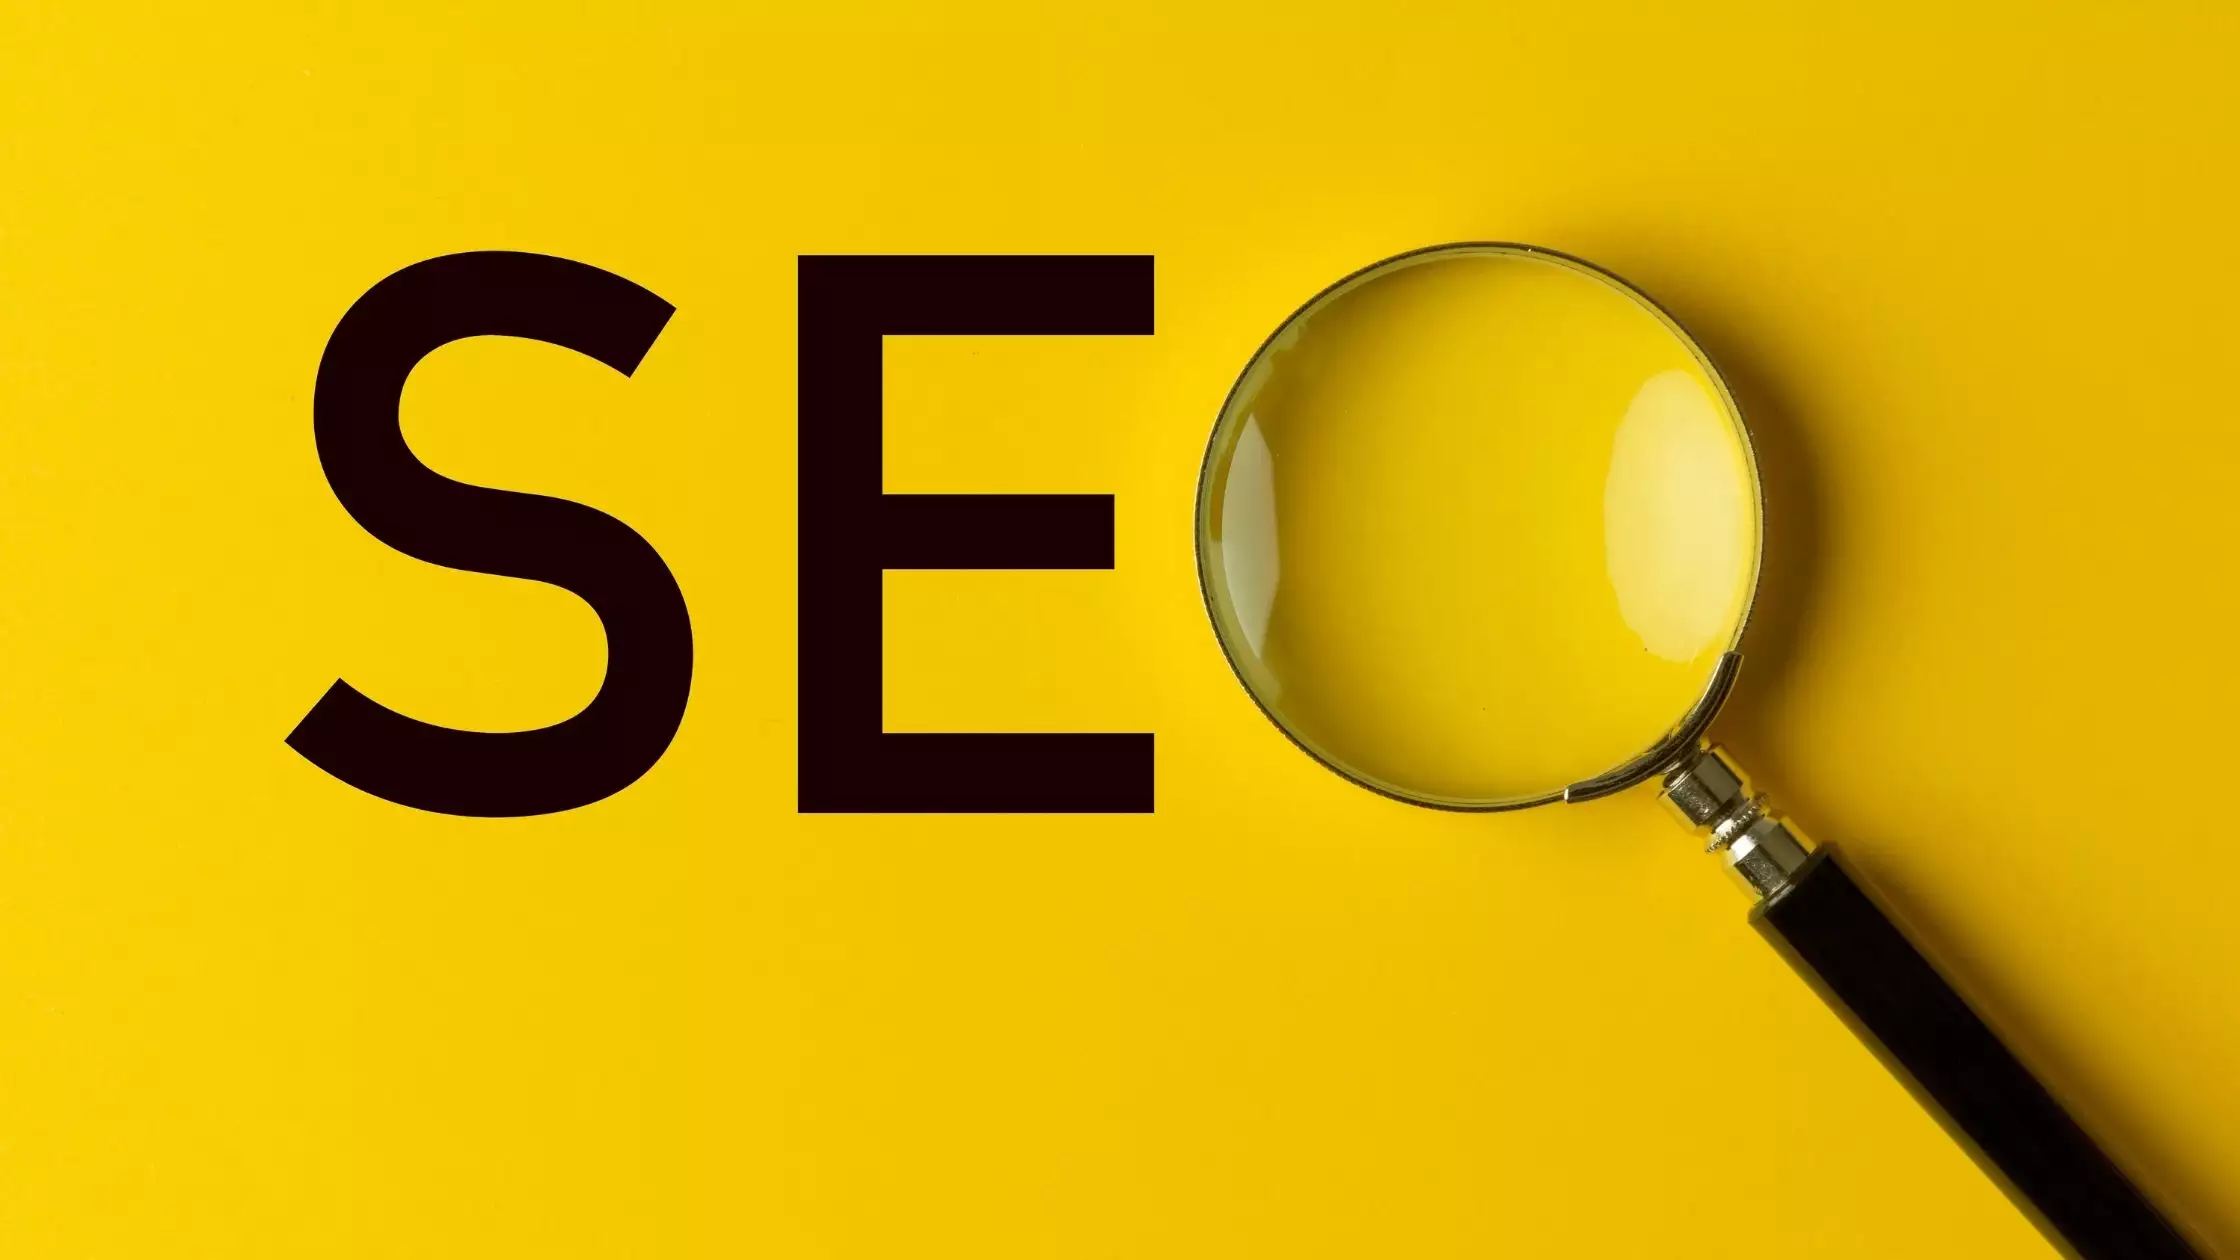 Fantastic Tips To Try For Your Search Engine Optimization Needs